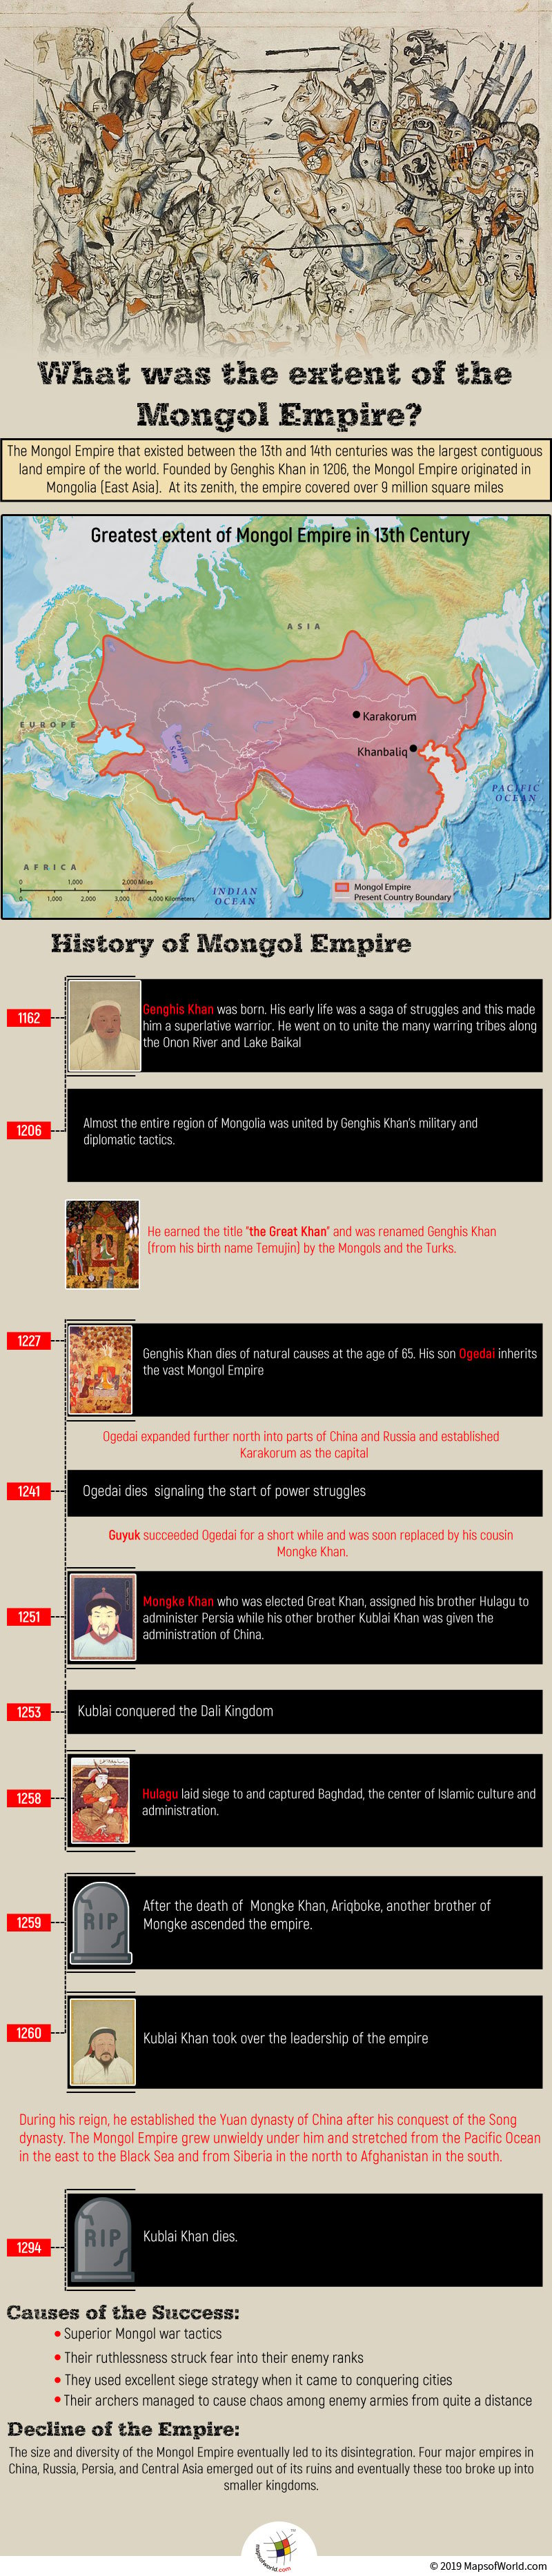 Infographic Giving Details on The History of Mongol Empire